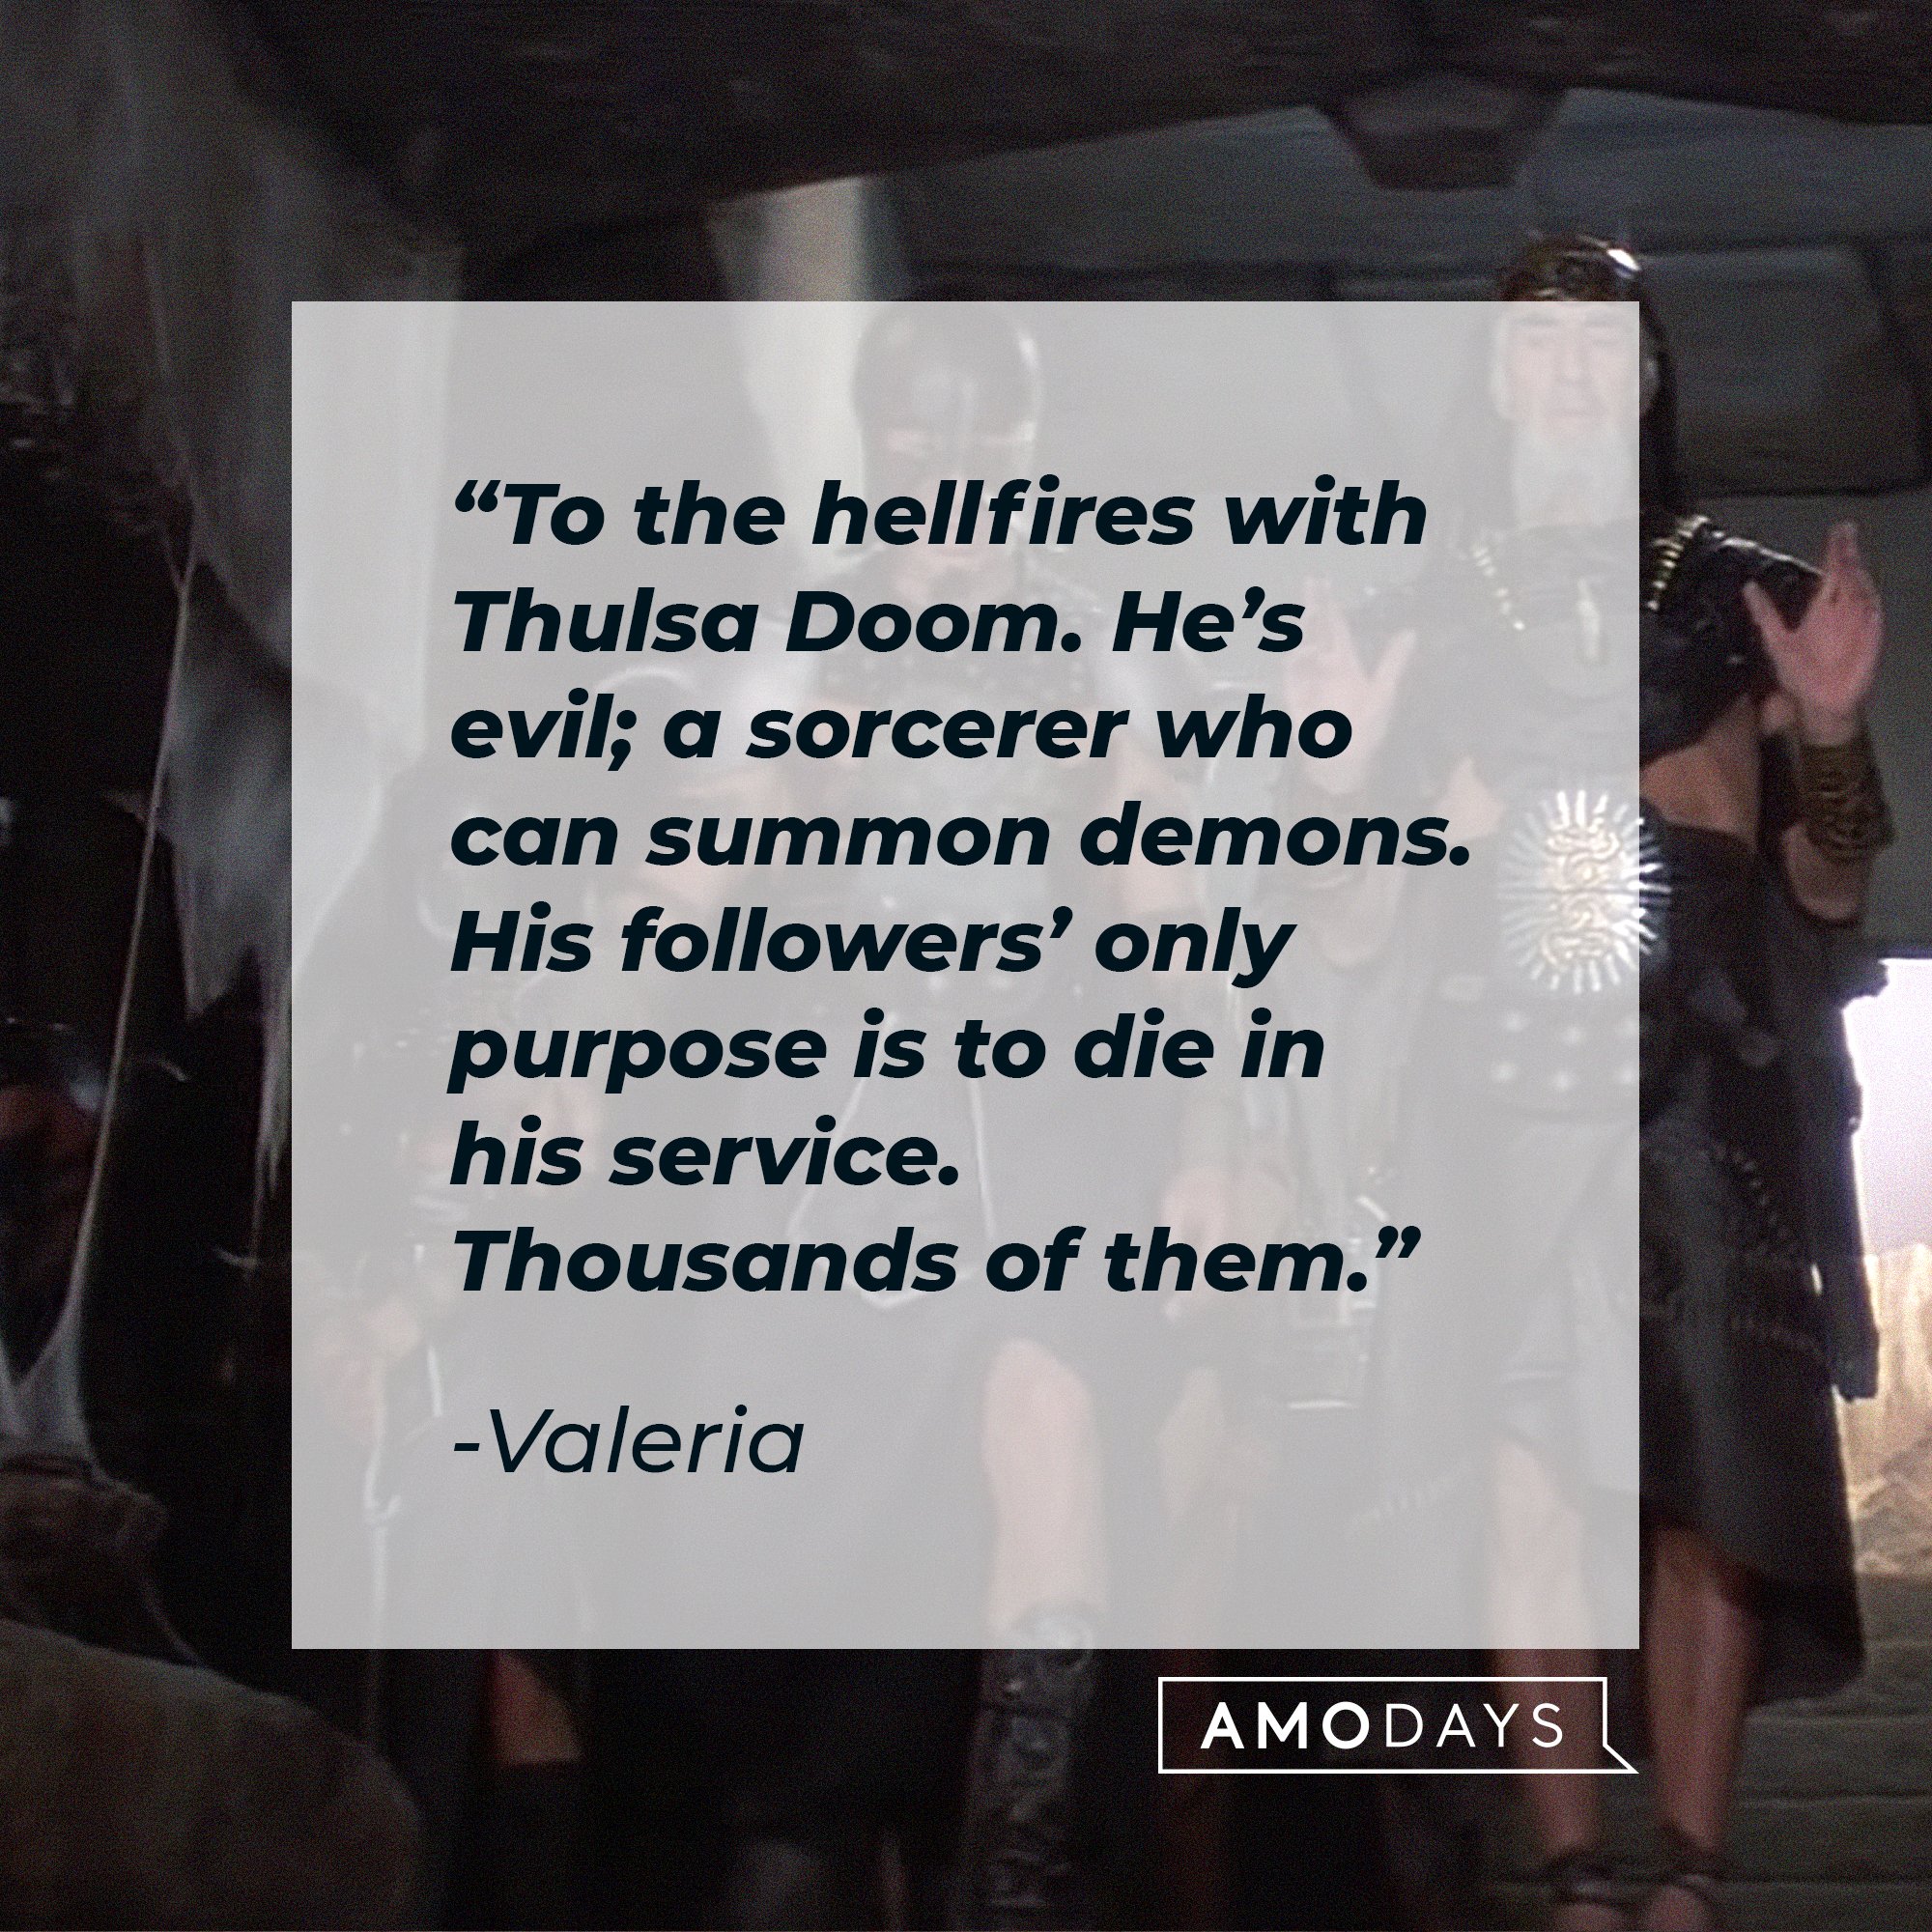 Valeria's quote: “To the hellfires with Thulsa Doom. He’s evil; a sorcerer who can summon demons. His followers’ only purpose is to die in his service. Thousands of them.” | Image: AmoDays